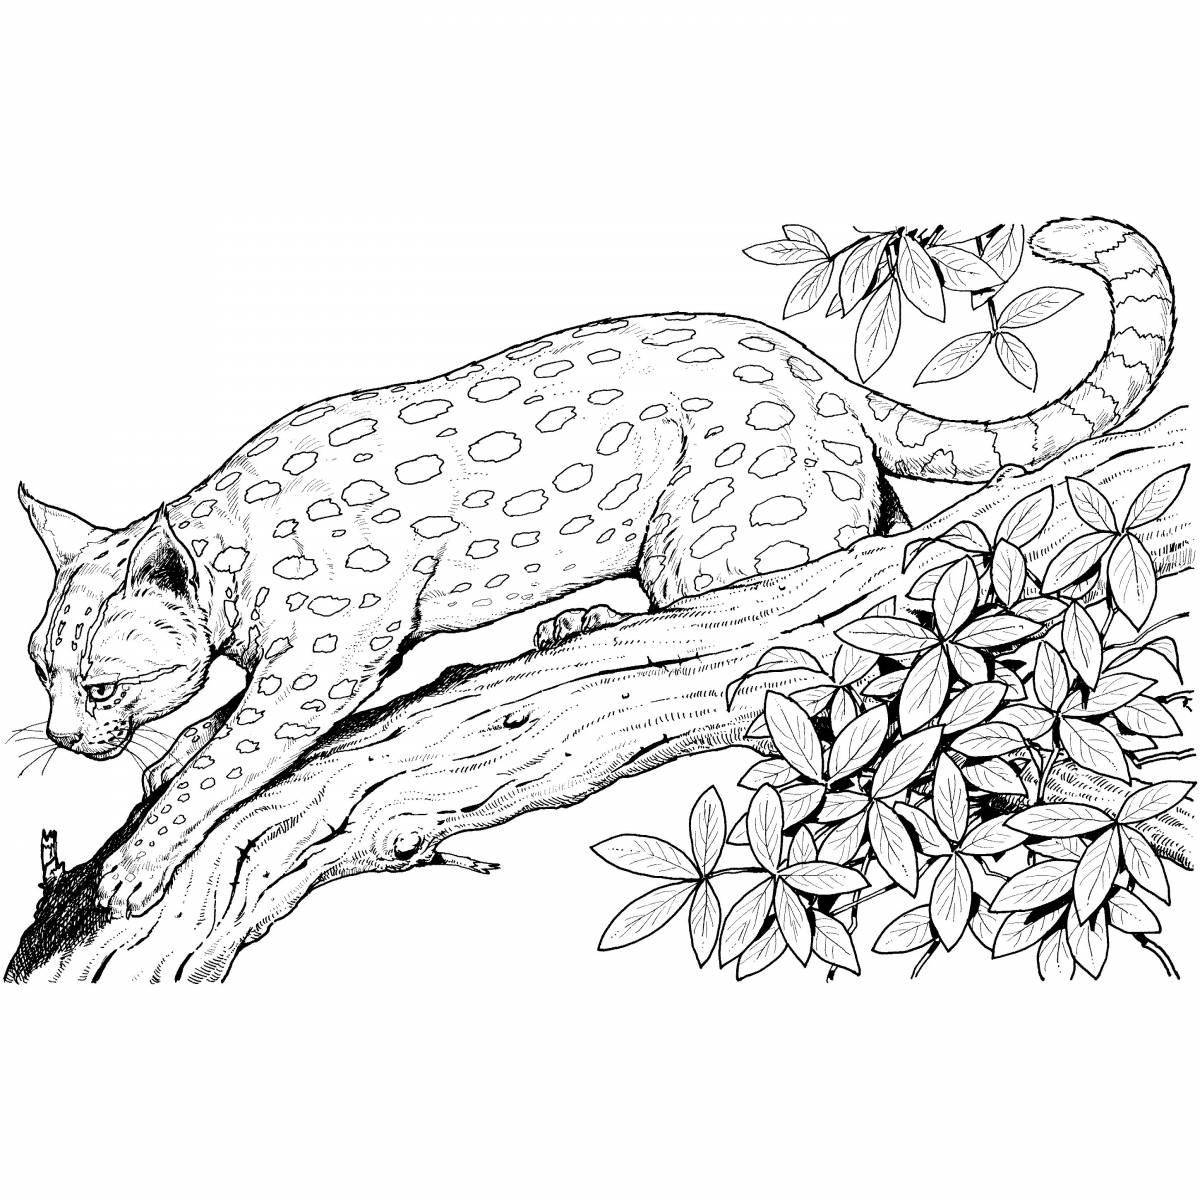 Exciting cane cat coloring page